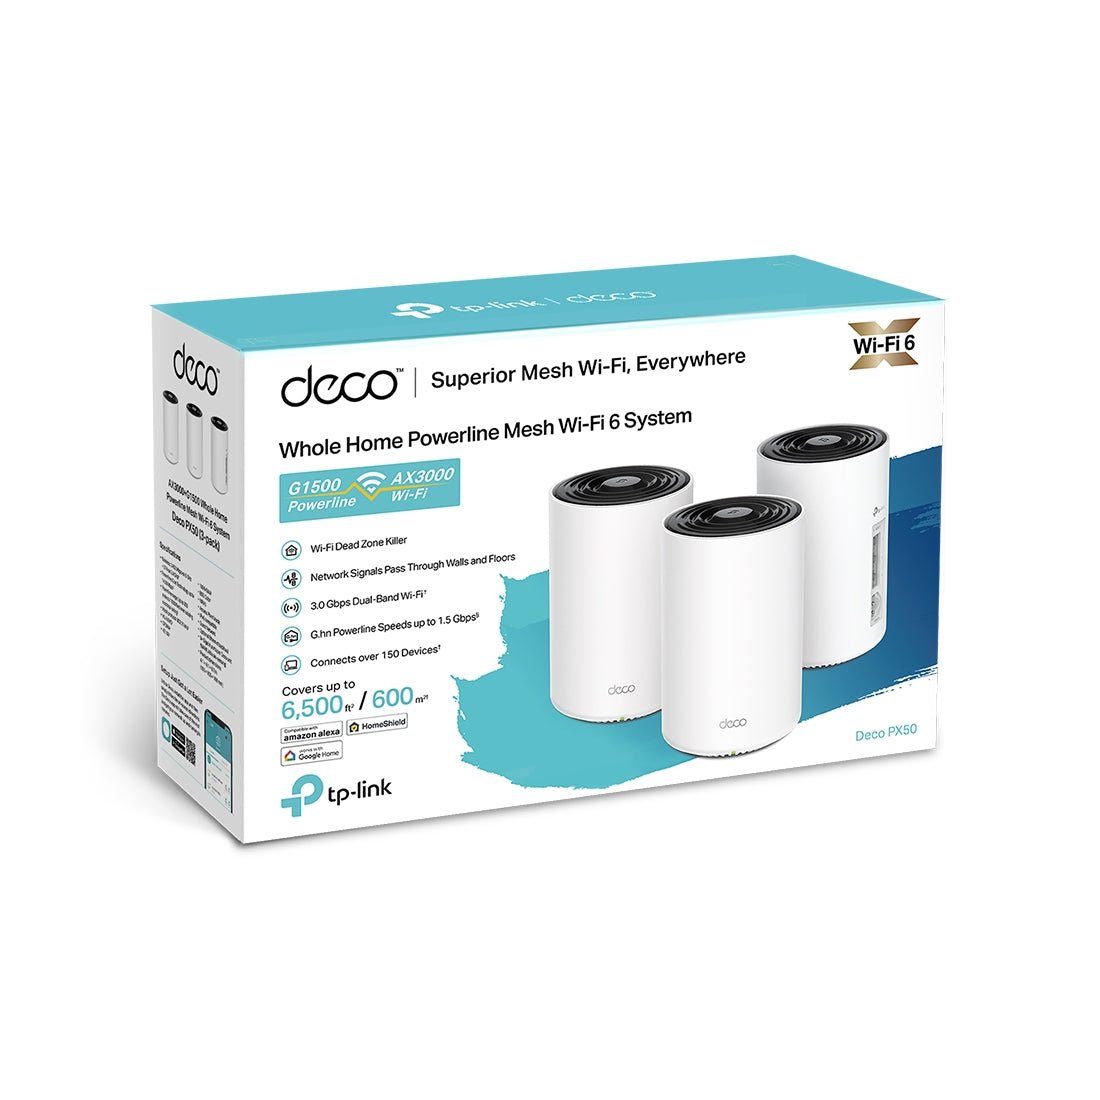 TP-Link Deco PX50 AX3000 + G1500 Whole Home Powerline Mesh WiFi 6 System - 3 Pack - راوتر - Store 974 | ستور ٩٧٤